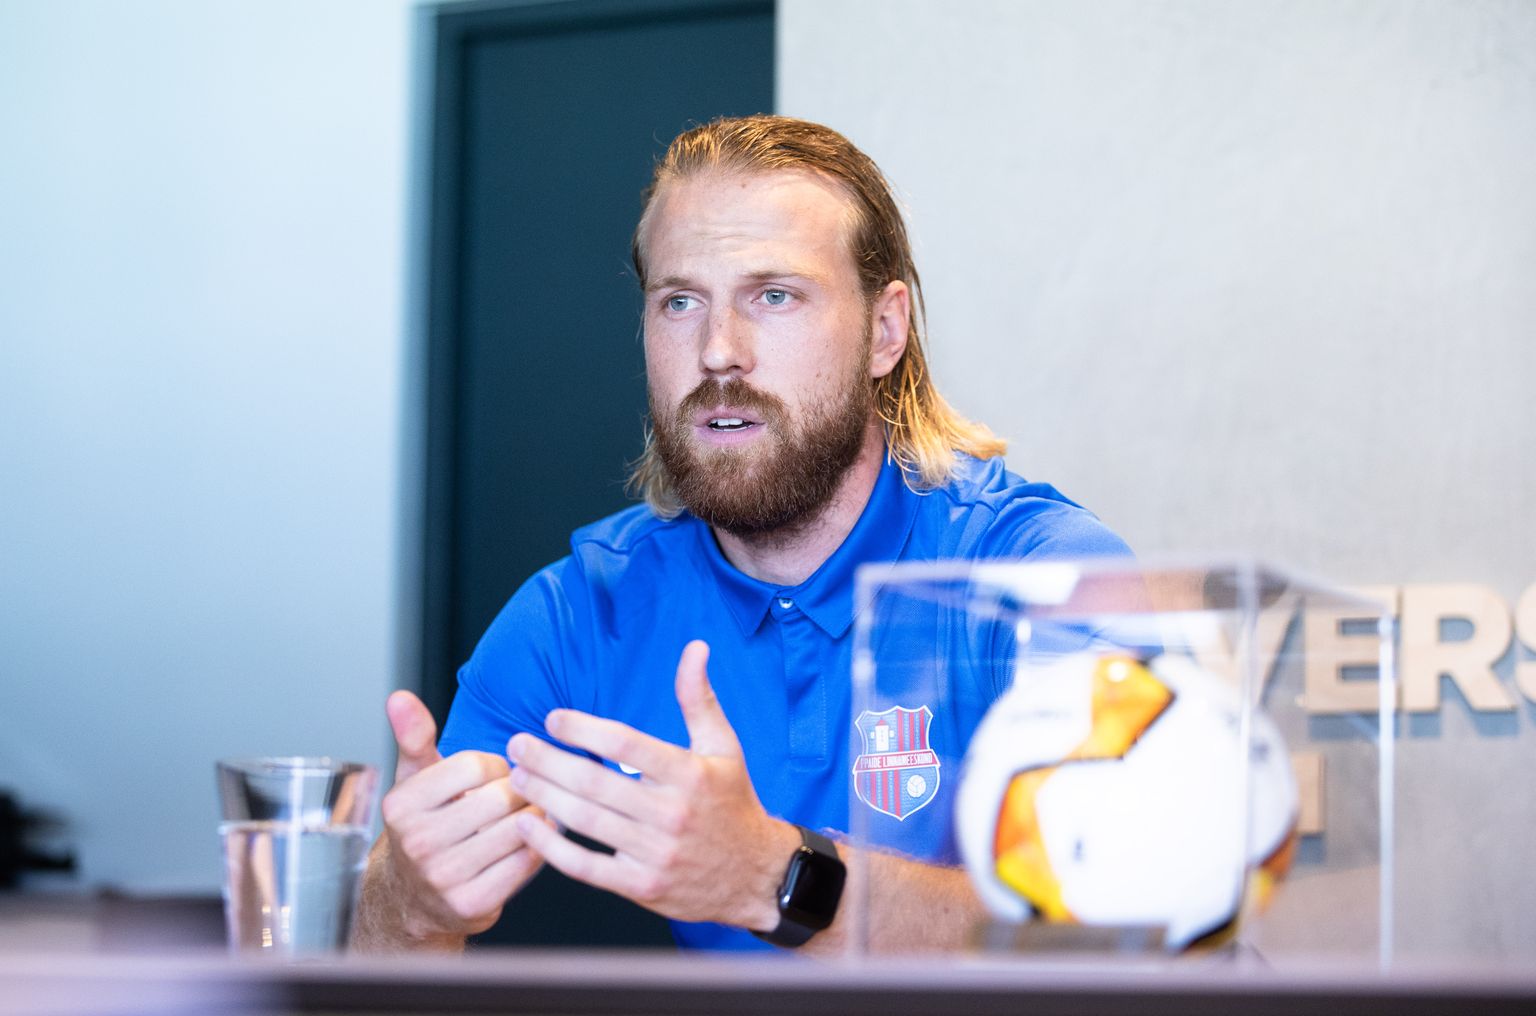 Tallinn, 24.08.2020
Jalgpall. Paide linnameeskond. Pressikonverents. Henri Anier.

Press conference of the Paide city team in soccer.
Foto Tairo Lutter, Postimees